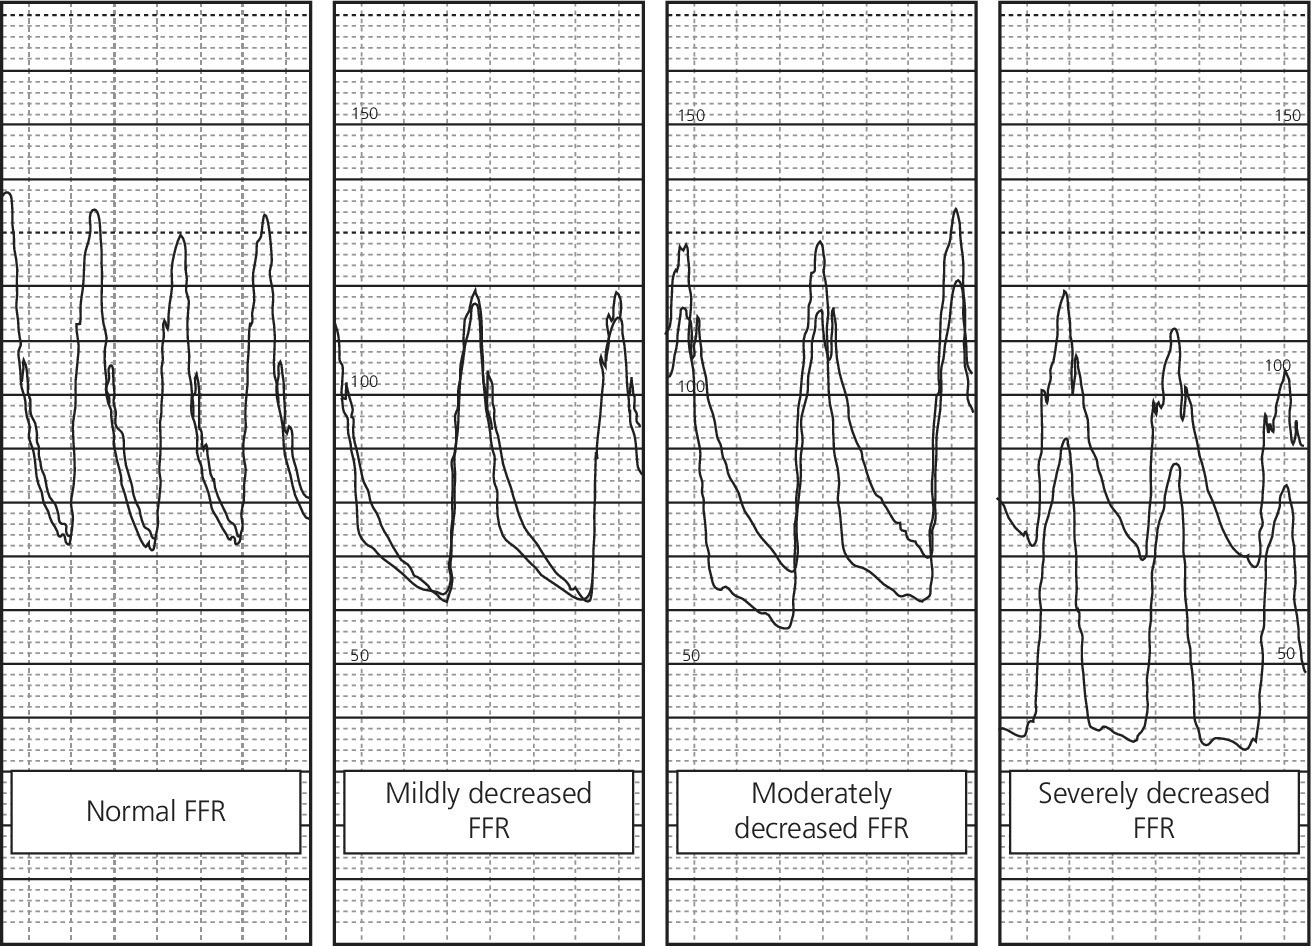 4 ECGs displaying (from left to right) normal FFR and mildly, moderately, and severely decreased FFR from 4 patients with coronary disease.